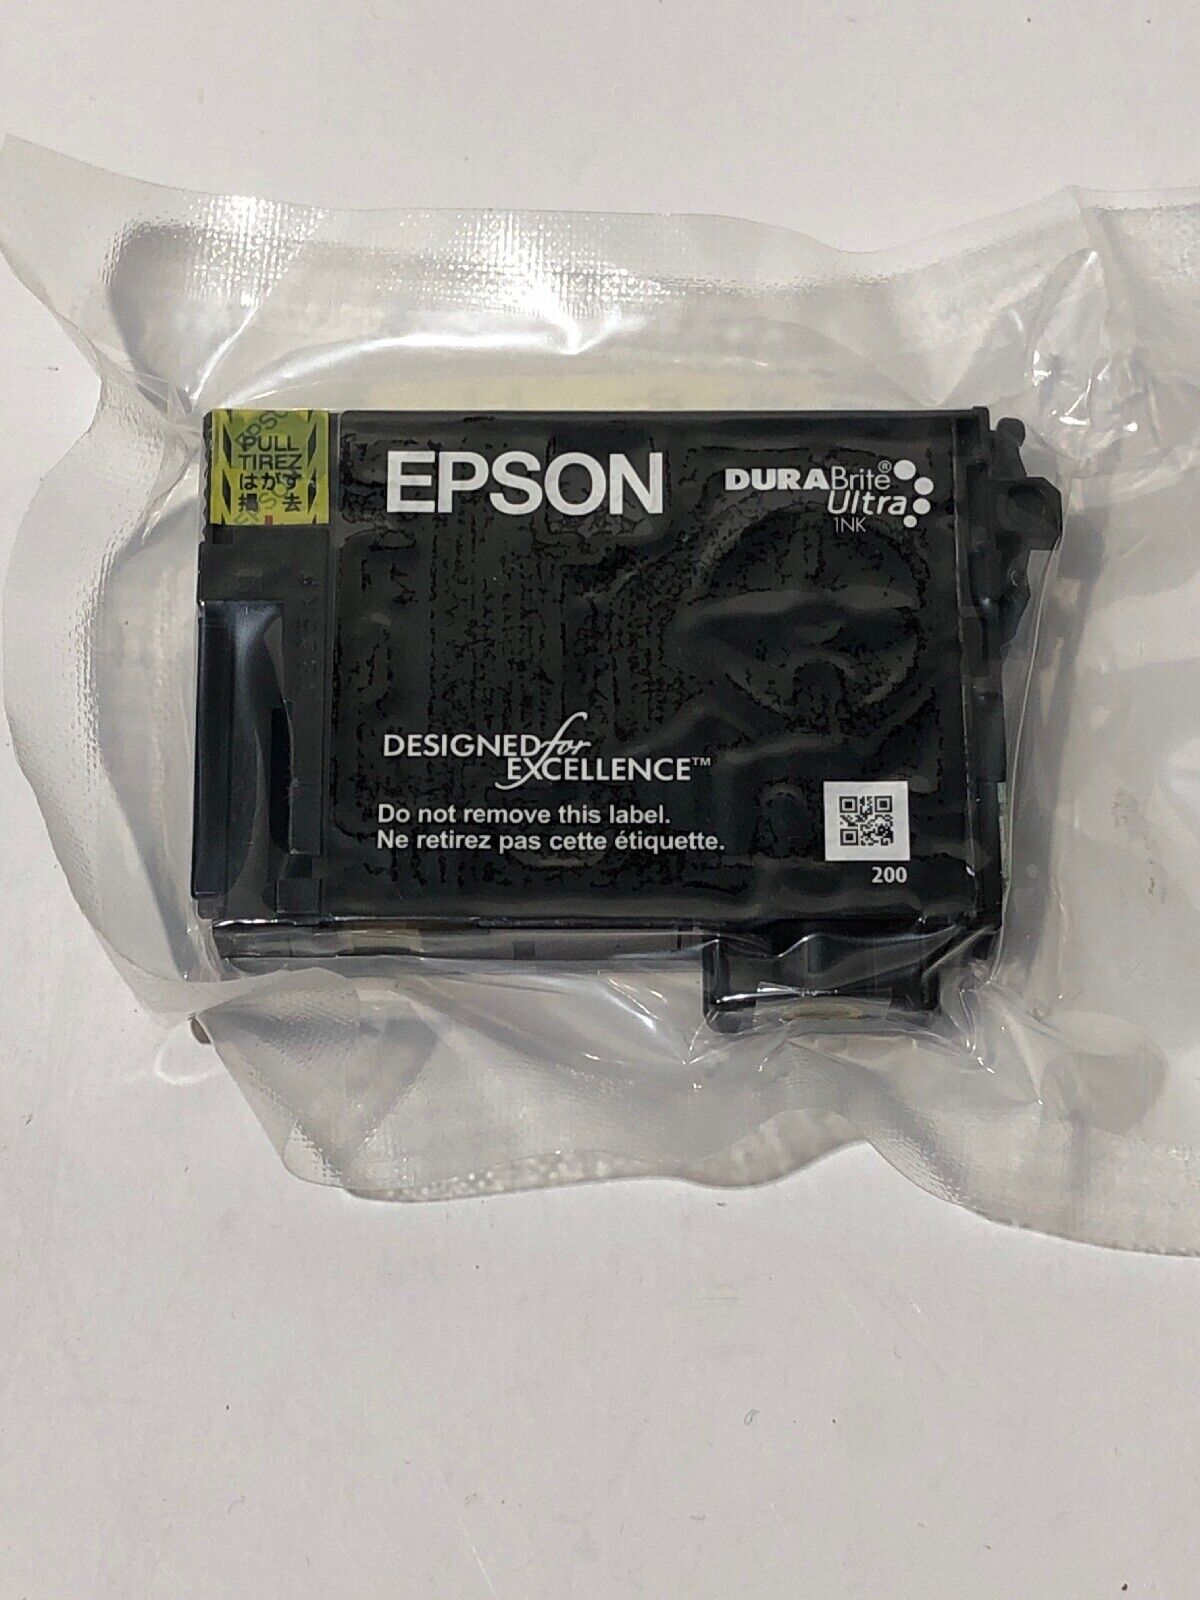 Epson DURABrite Ultra 200 Y Yellow Ink Cartridge - Sealed as issued. 